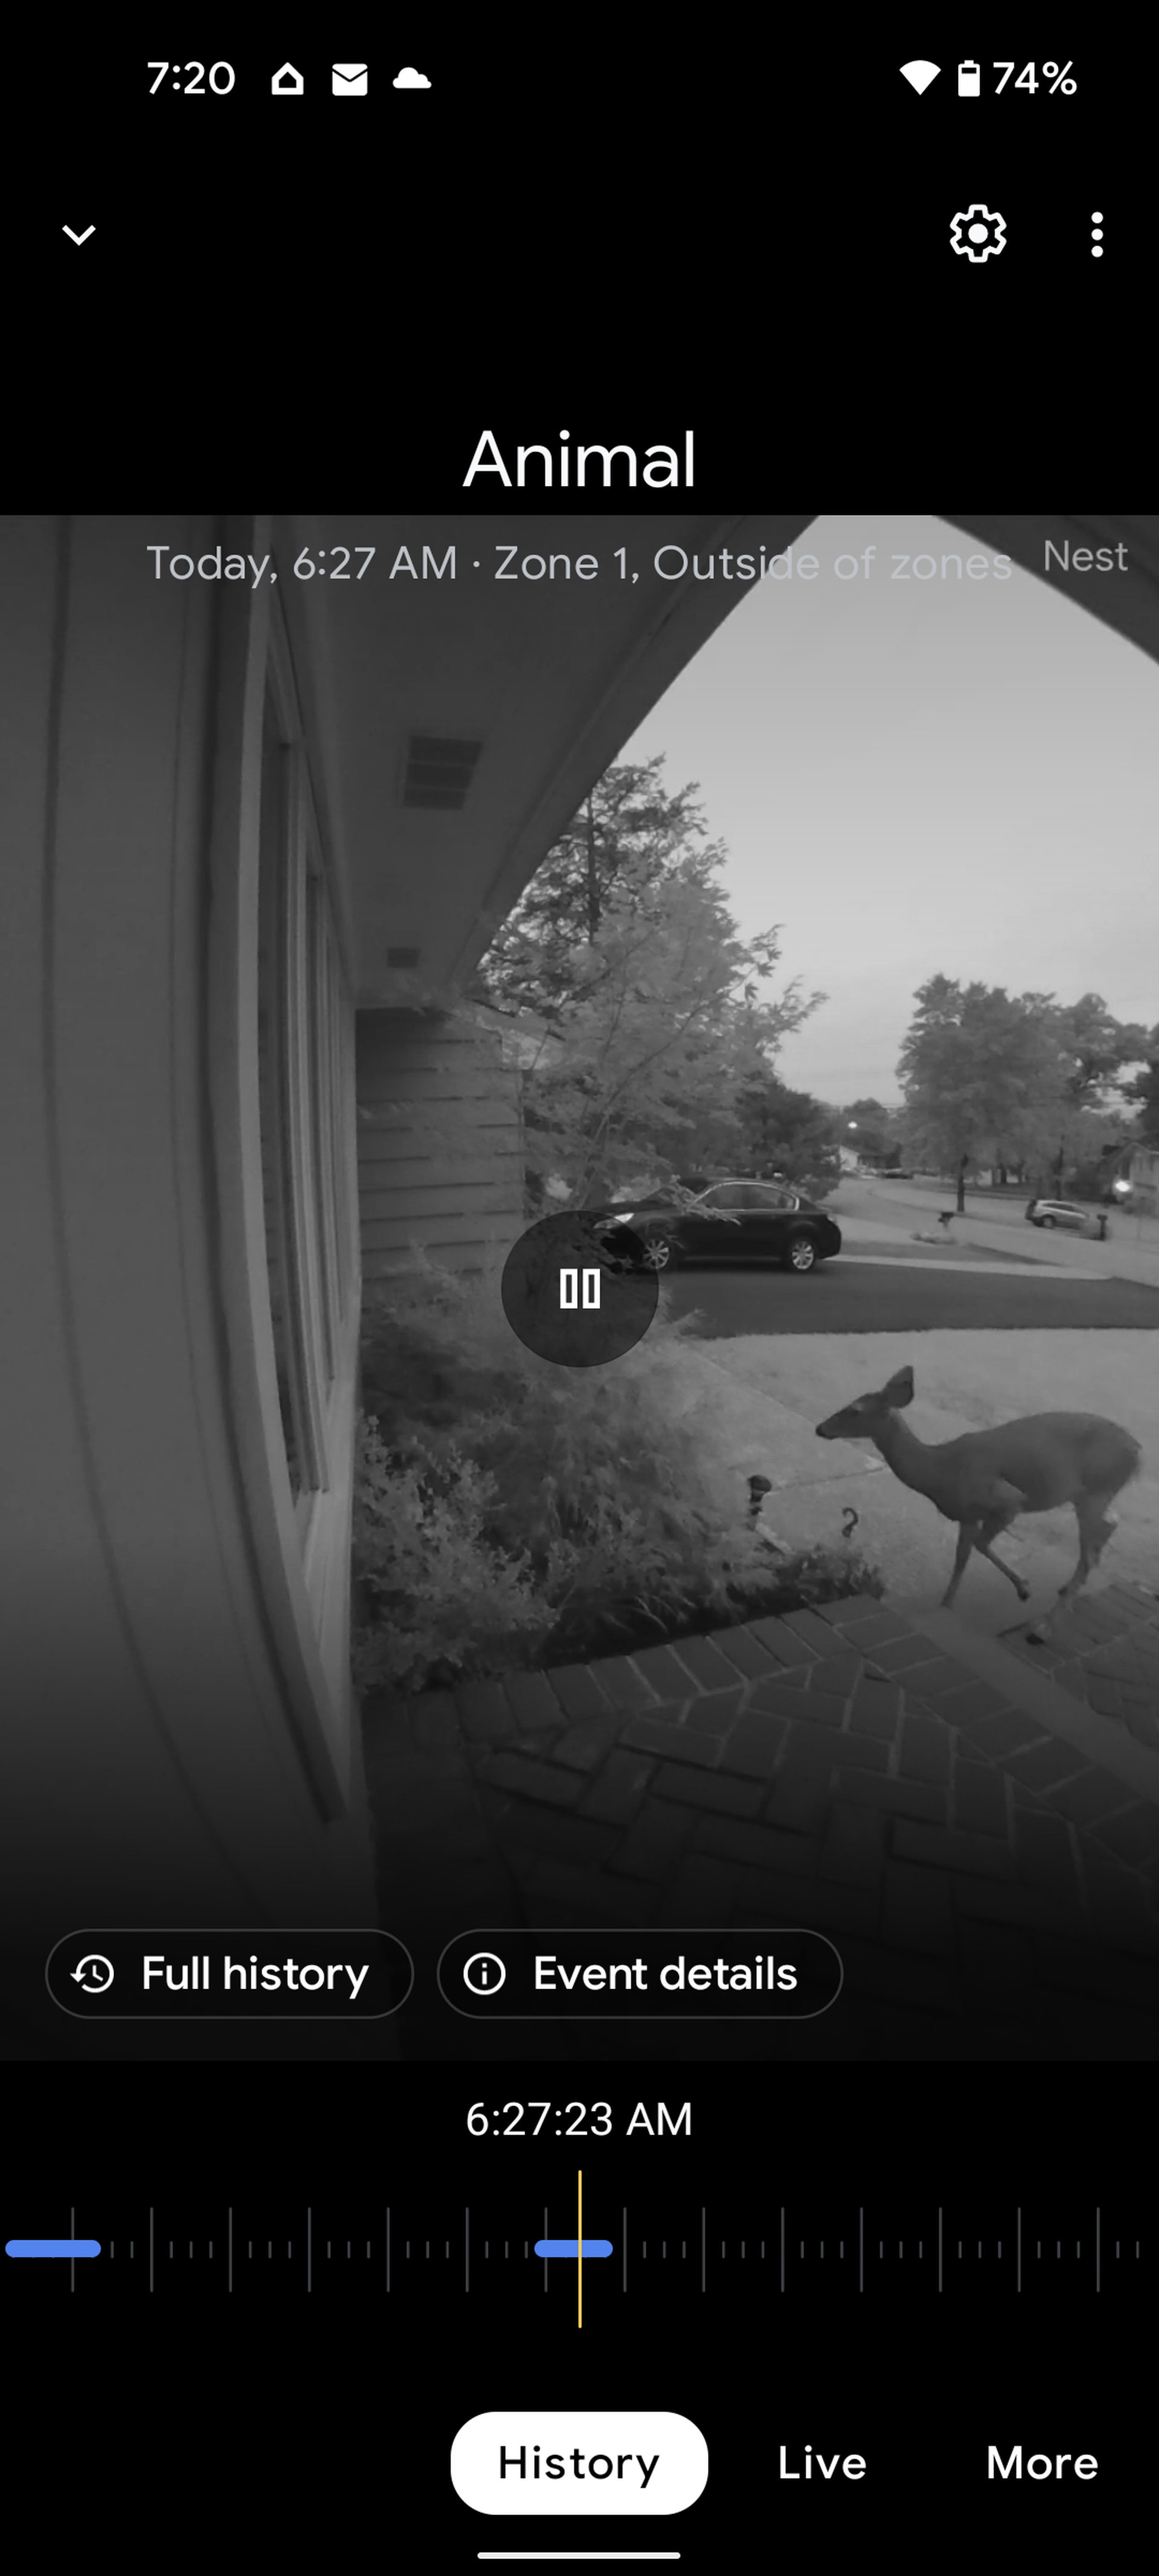 The Nest Doorbell’s onboard intelligence can detect and alert you to familiar faces, packages, animals, and moving vehicles without using cloud processing.